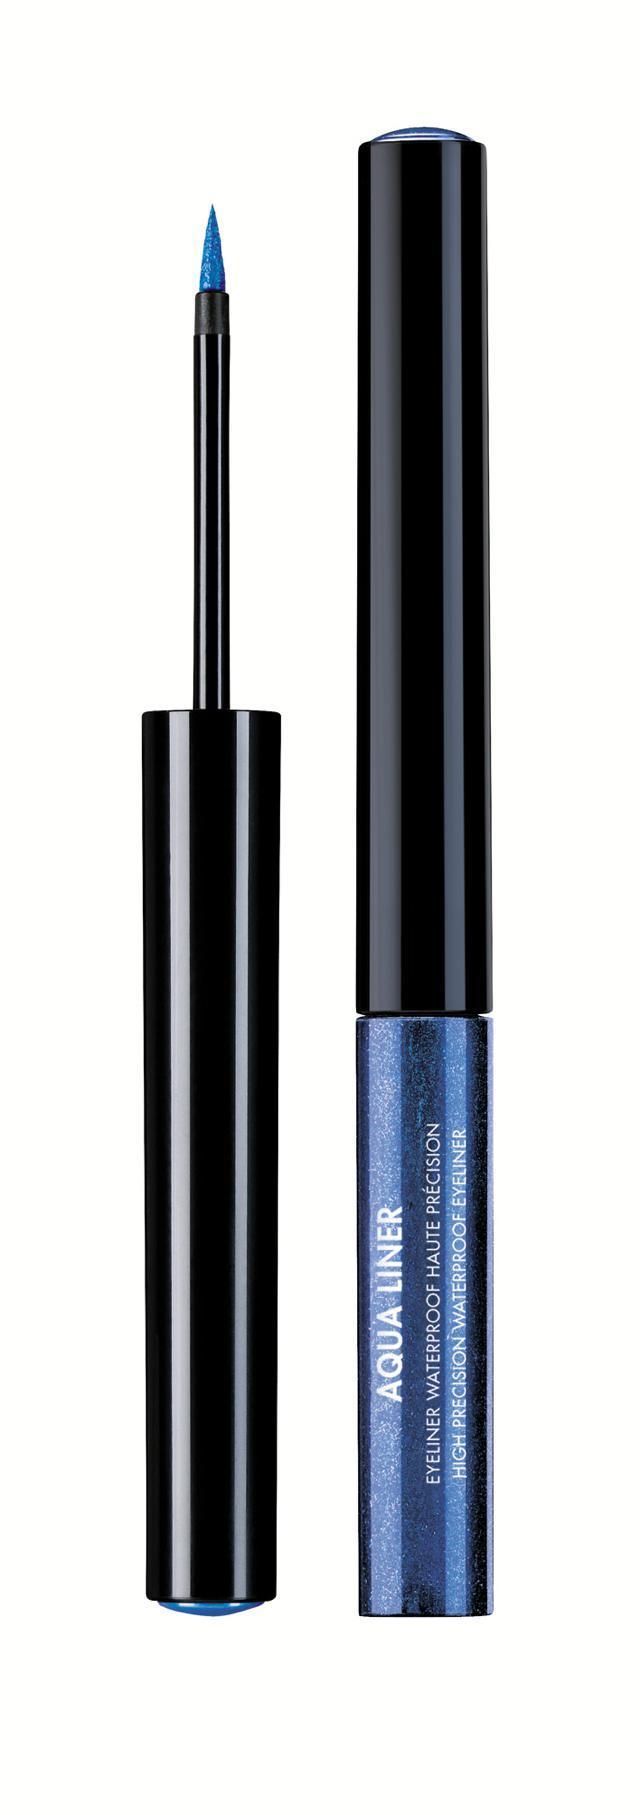 Line, Parallel, Tints and shades, Electric blue, Cylinder, Silver, Cosmetics, Shadow, 